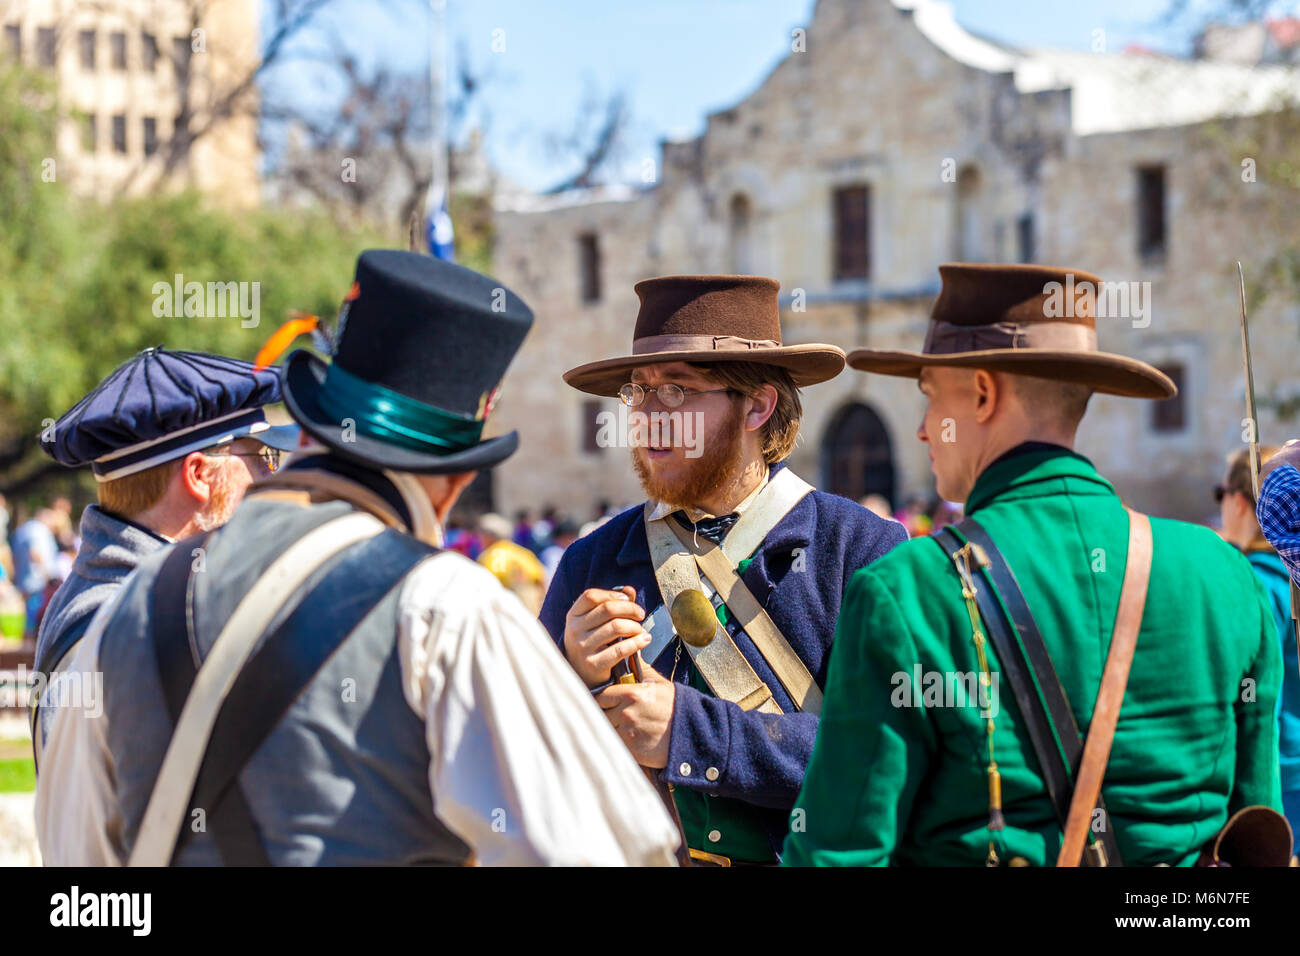 SAN ANTONIO, TEXAS - MARCH 2, 2018 - Men dressed as 19th century soldiers participate in the reenactment of the Battle of the Alamo, which took place  Stock Photo